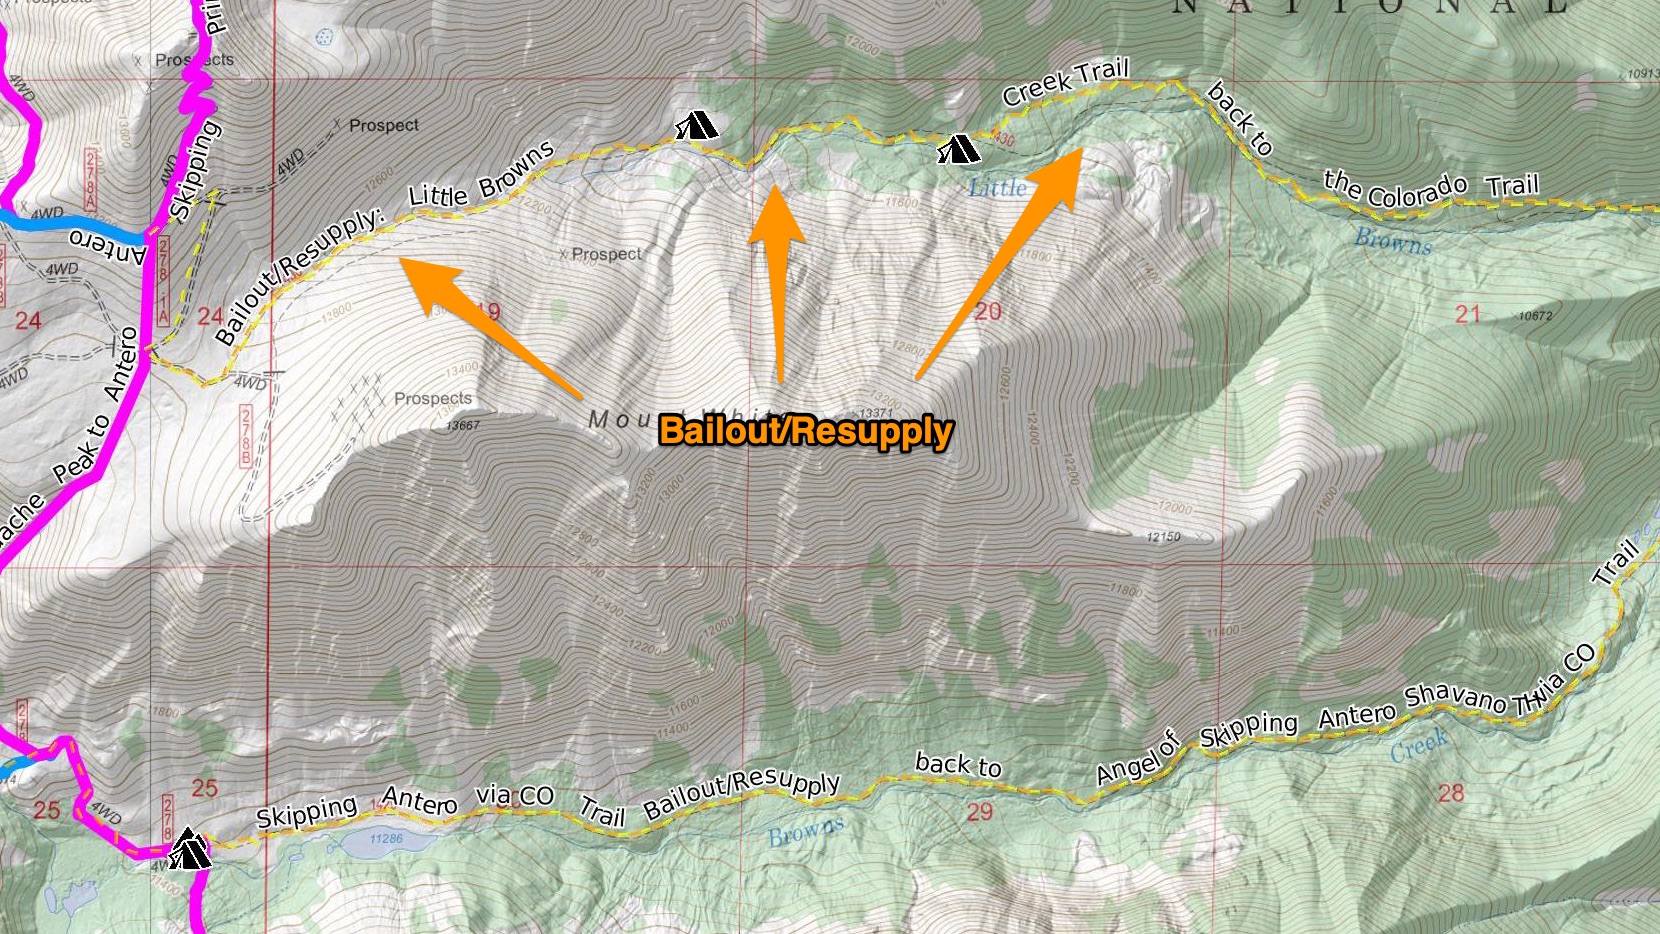 Bailout/Resupply Routes are shown in dashed orange lines